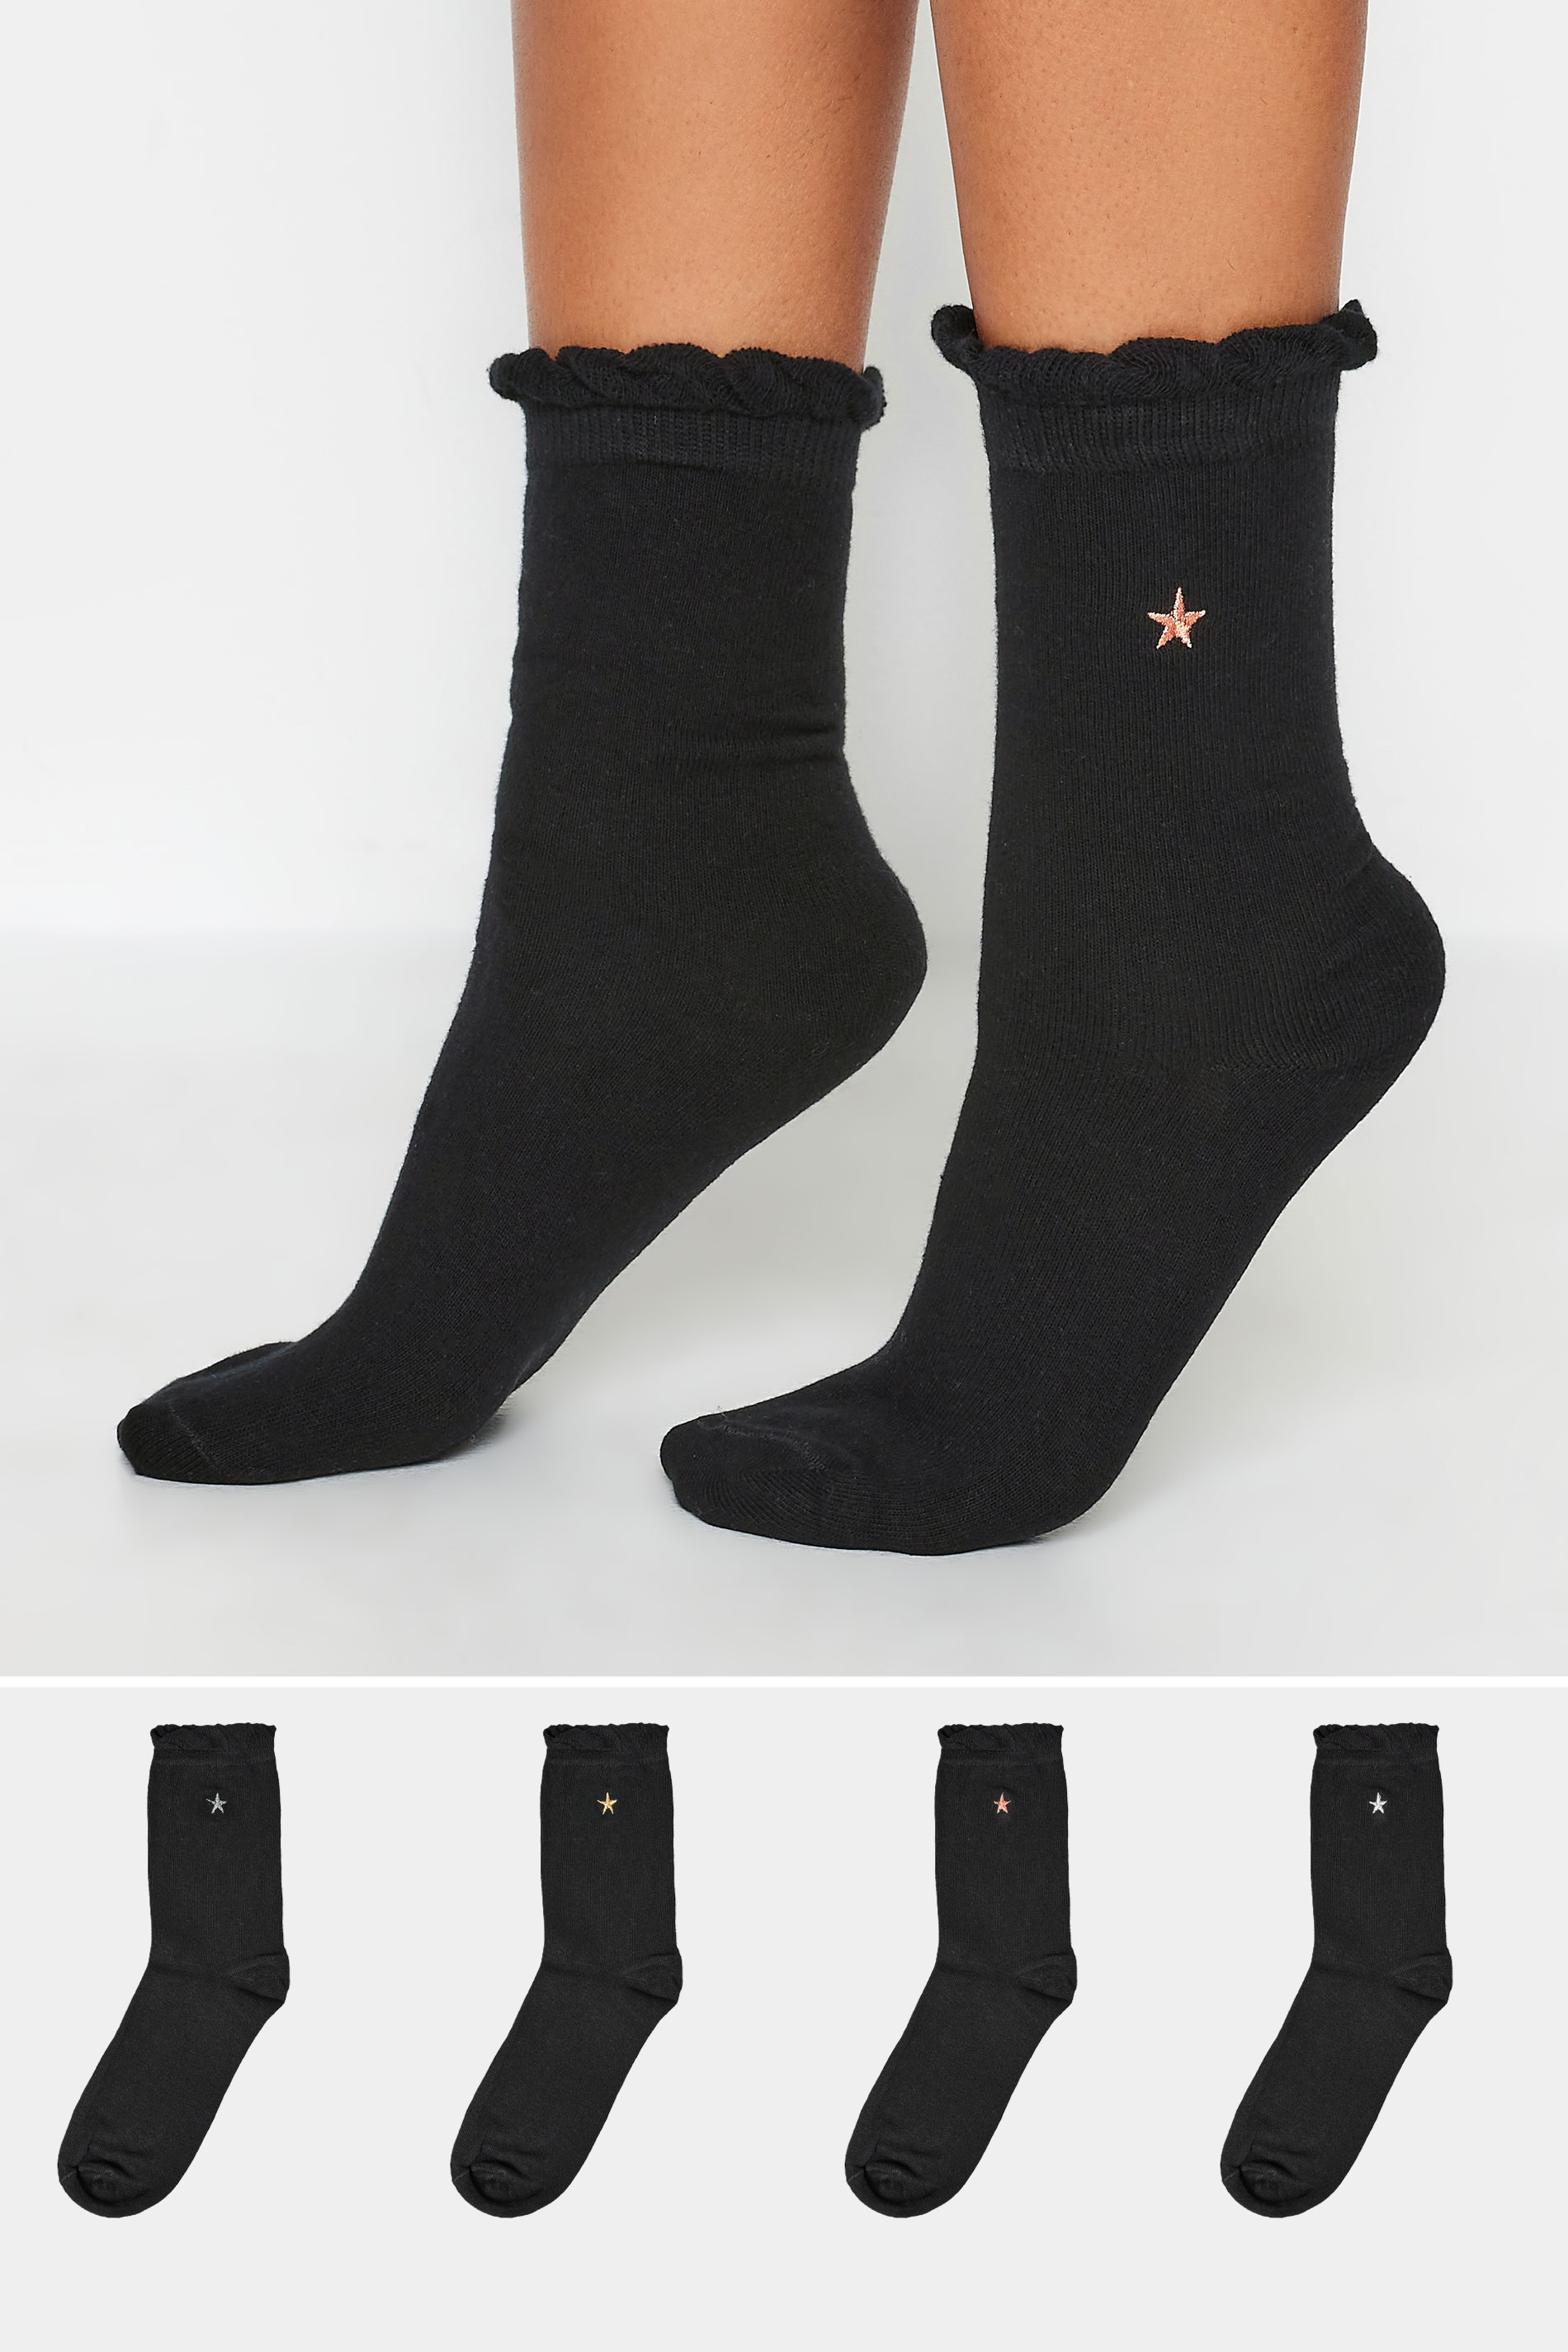 YOURS 4 PACK Black Embroidered Star Ankle Socks | Yours Clothing 1